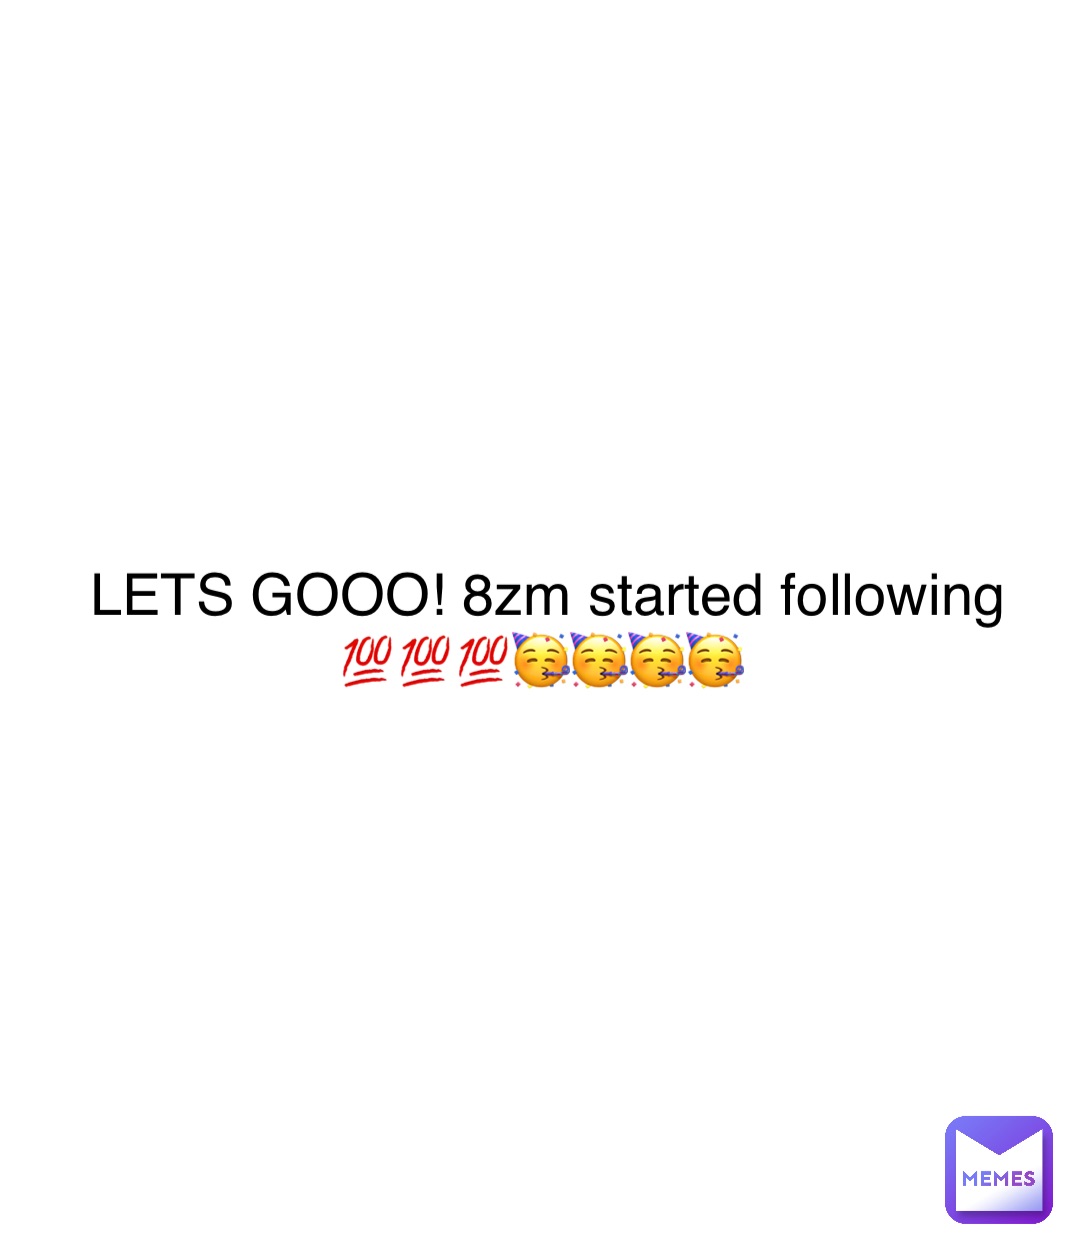 Double tap to edit LETS GOOO! 8zm started following 💯💯💯🥳🥳🥳🥳